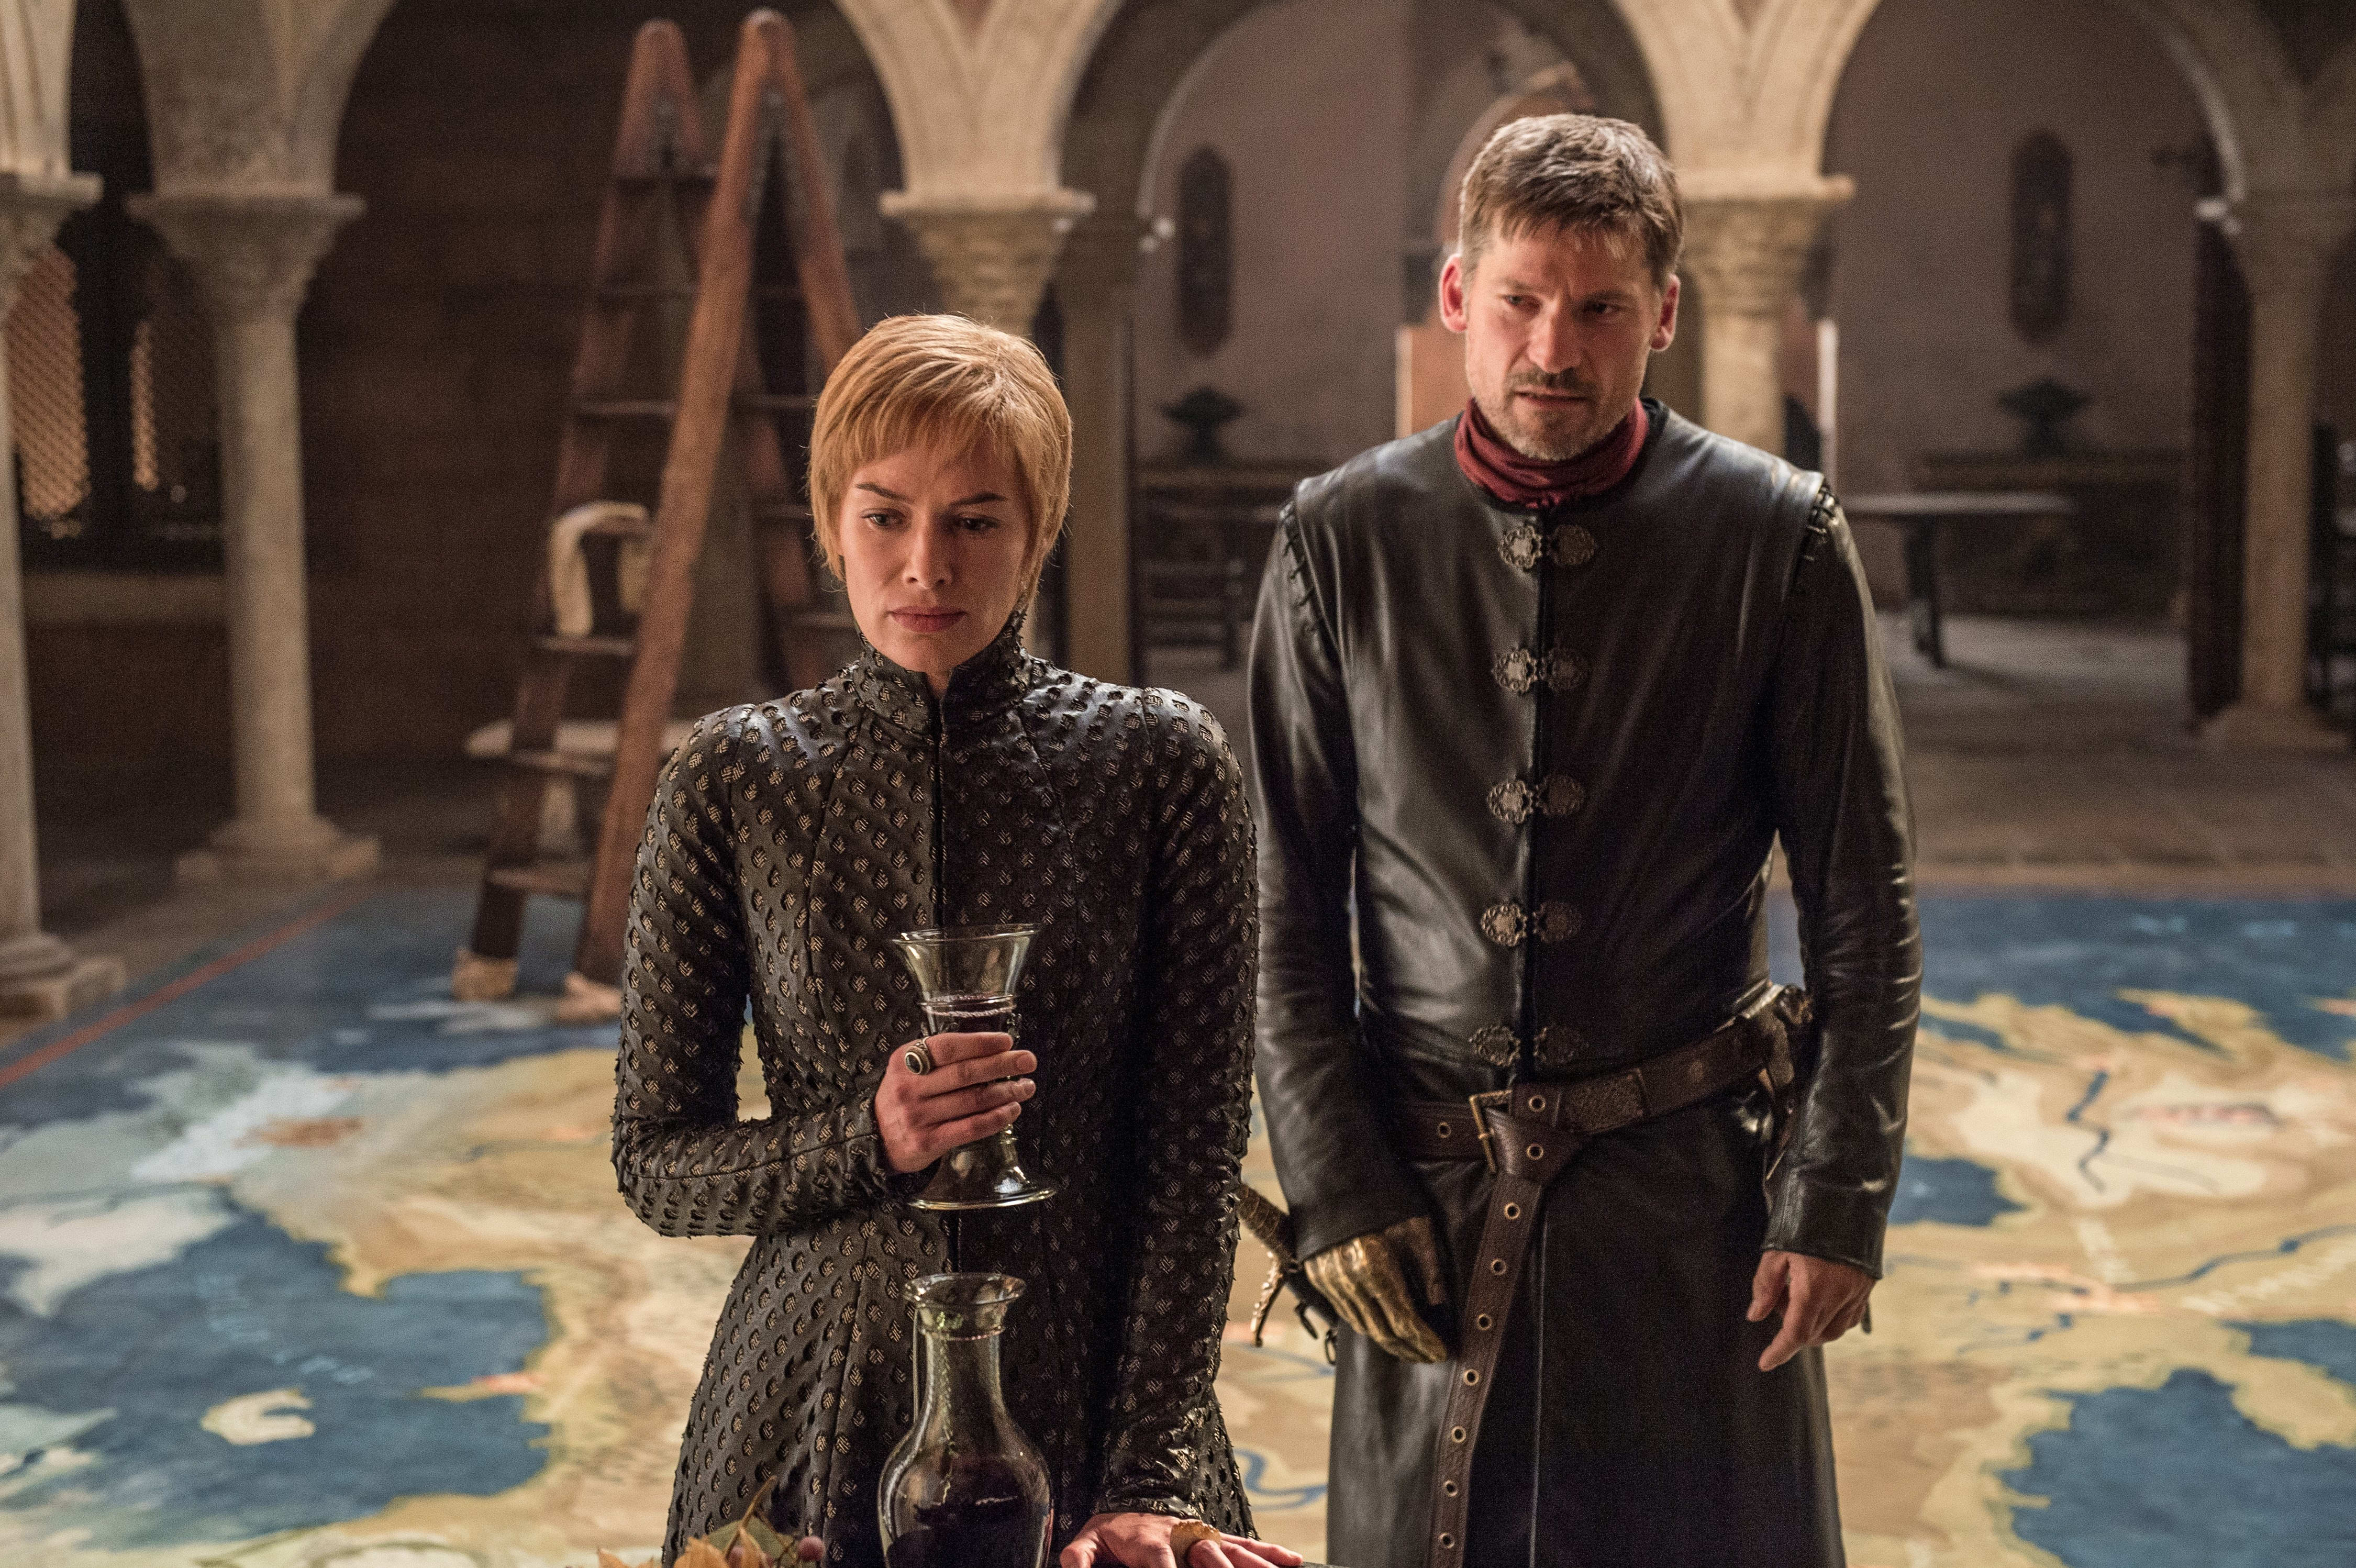 https%3A%2F%2Fwinteriscoming.net%2Ffiles%2F2017%2F06%2FGoT-S7-Cersei-and-Jaime-in-map-room